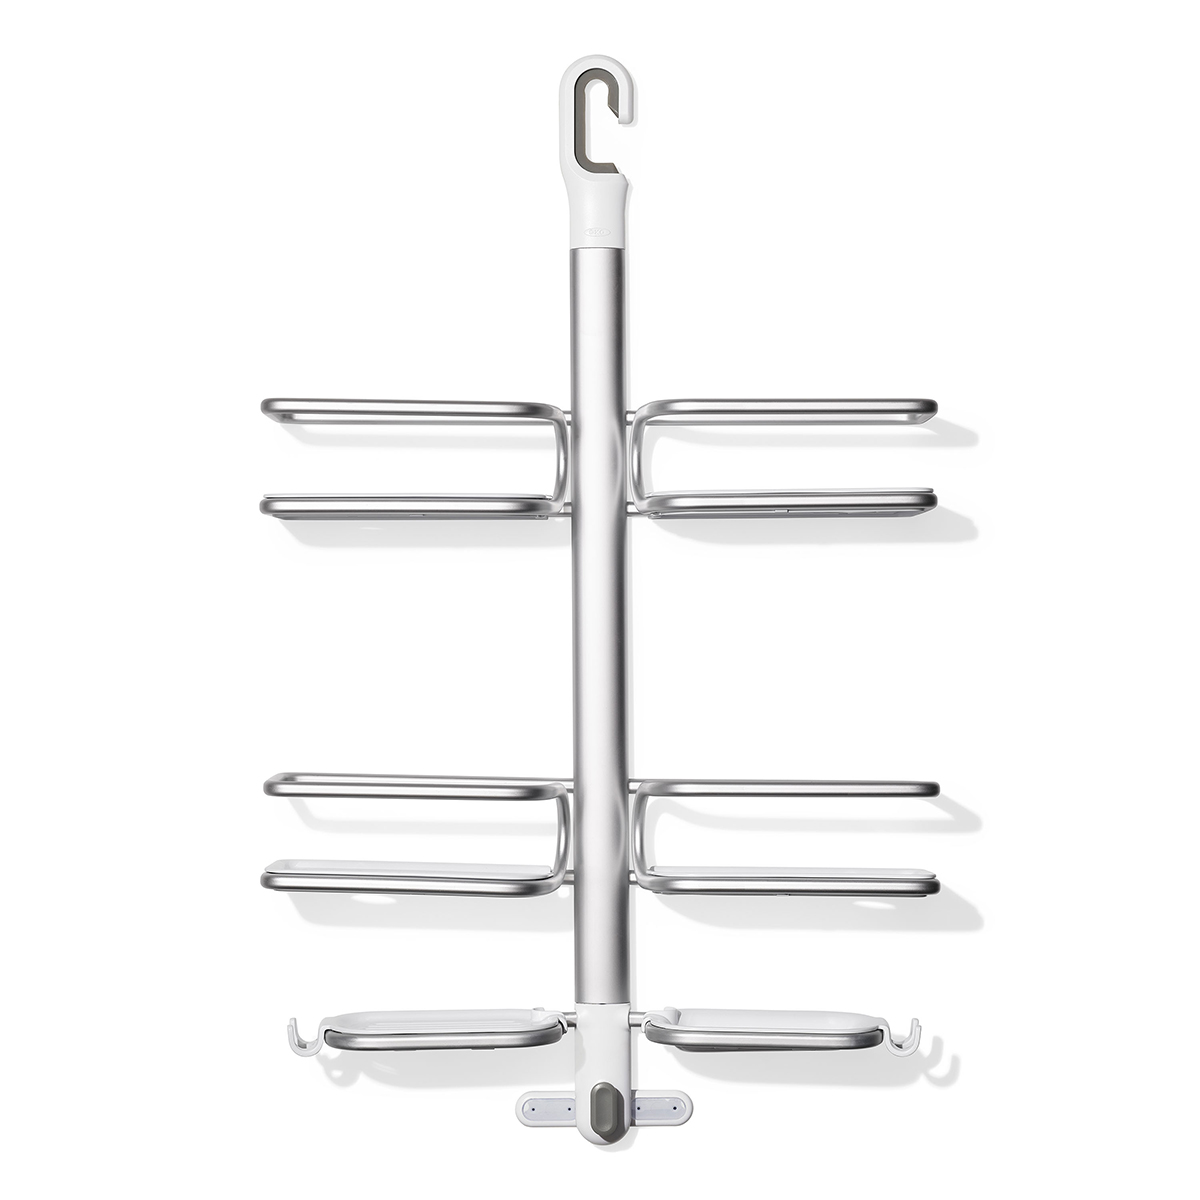 https://www.containerstore.com/catalogimages/423194/10085777-OXO-Shower-Caddy-VEN2.jpg